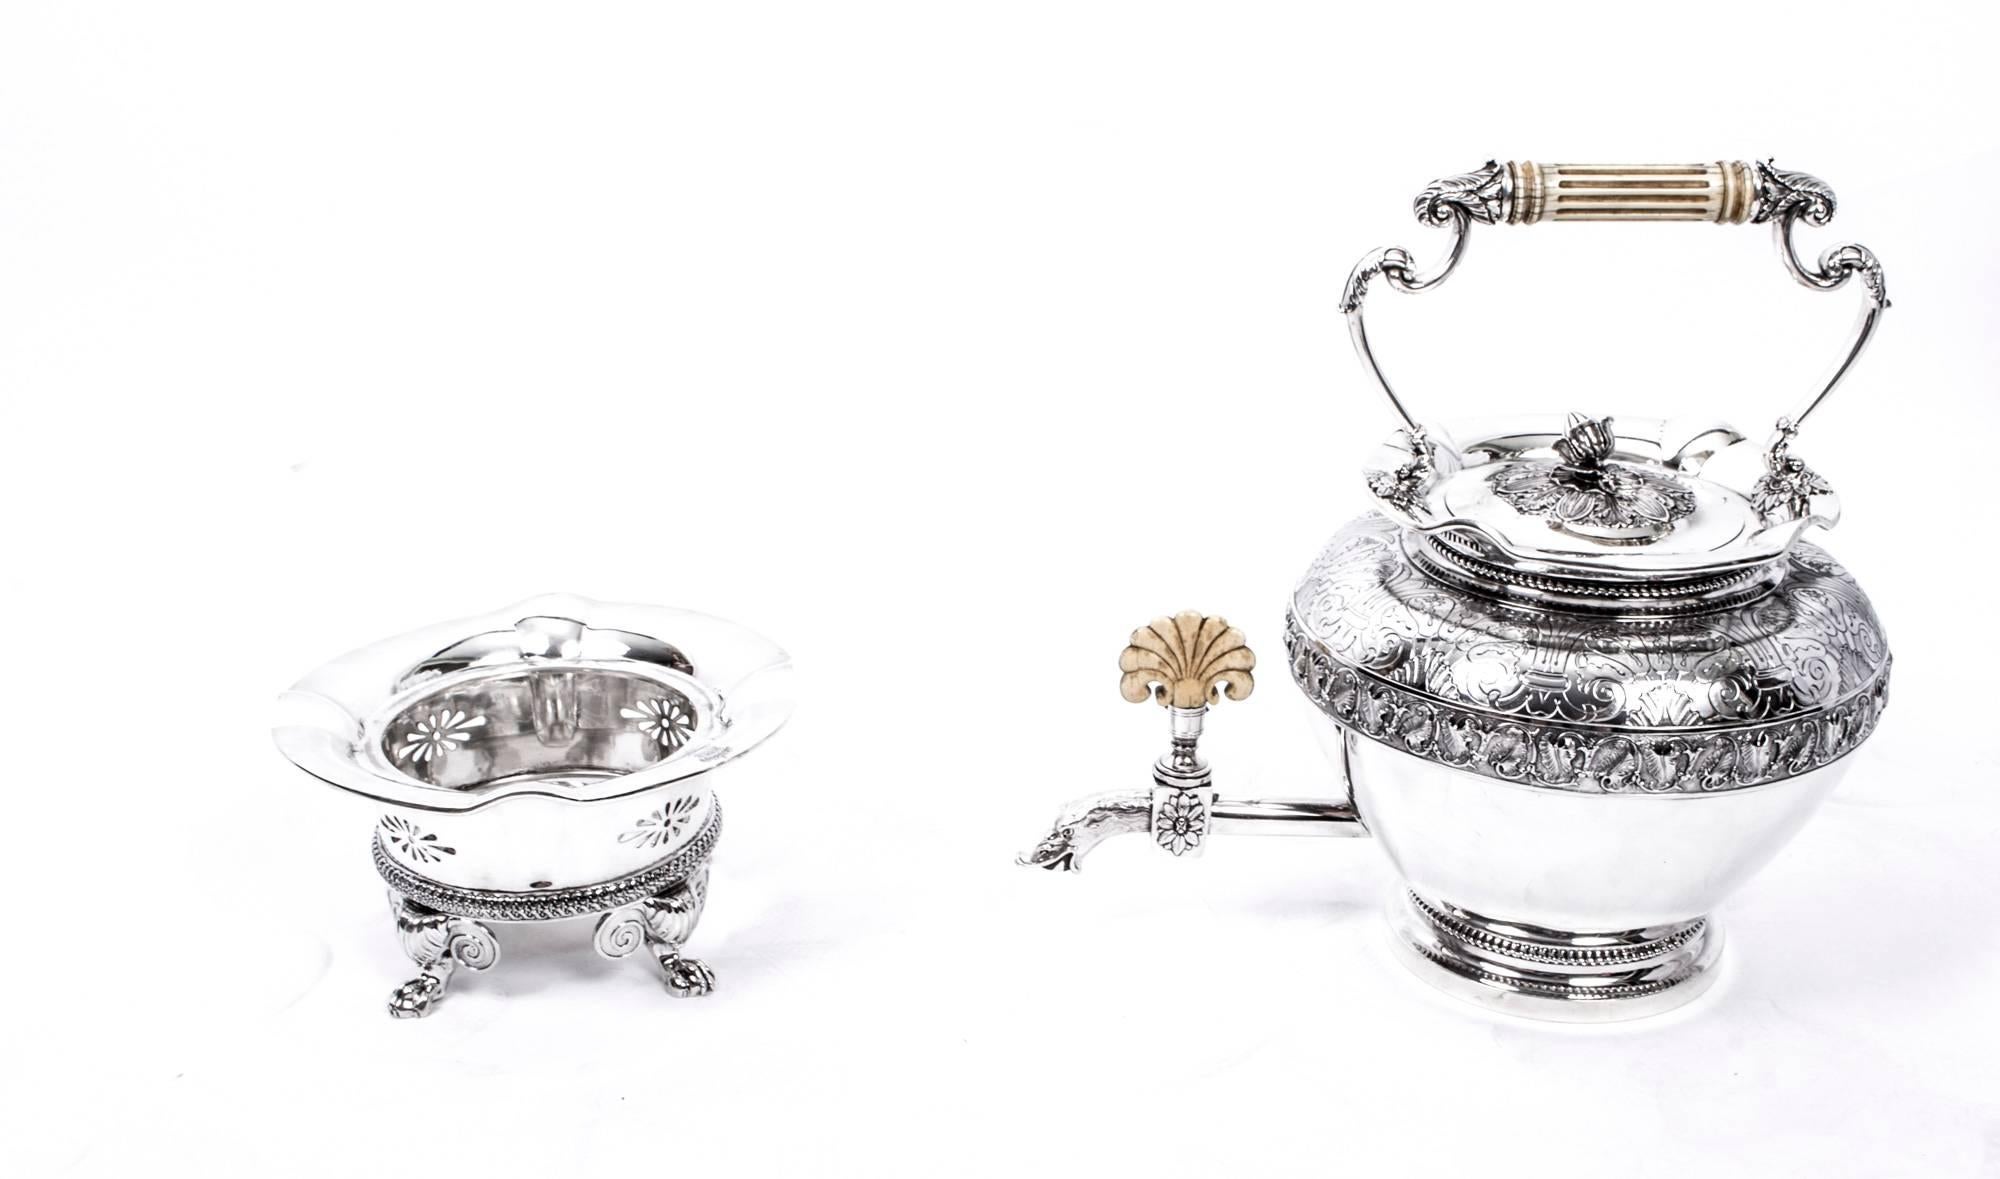 Early 19th Century Antique Sterling Silver Kettle on Stand John Bridge, 1825